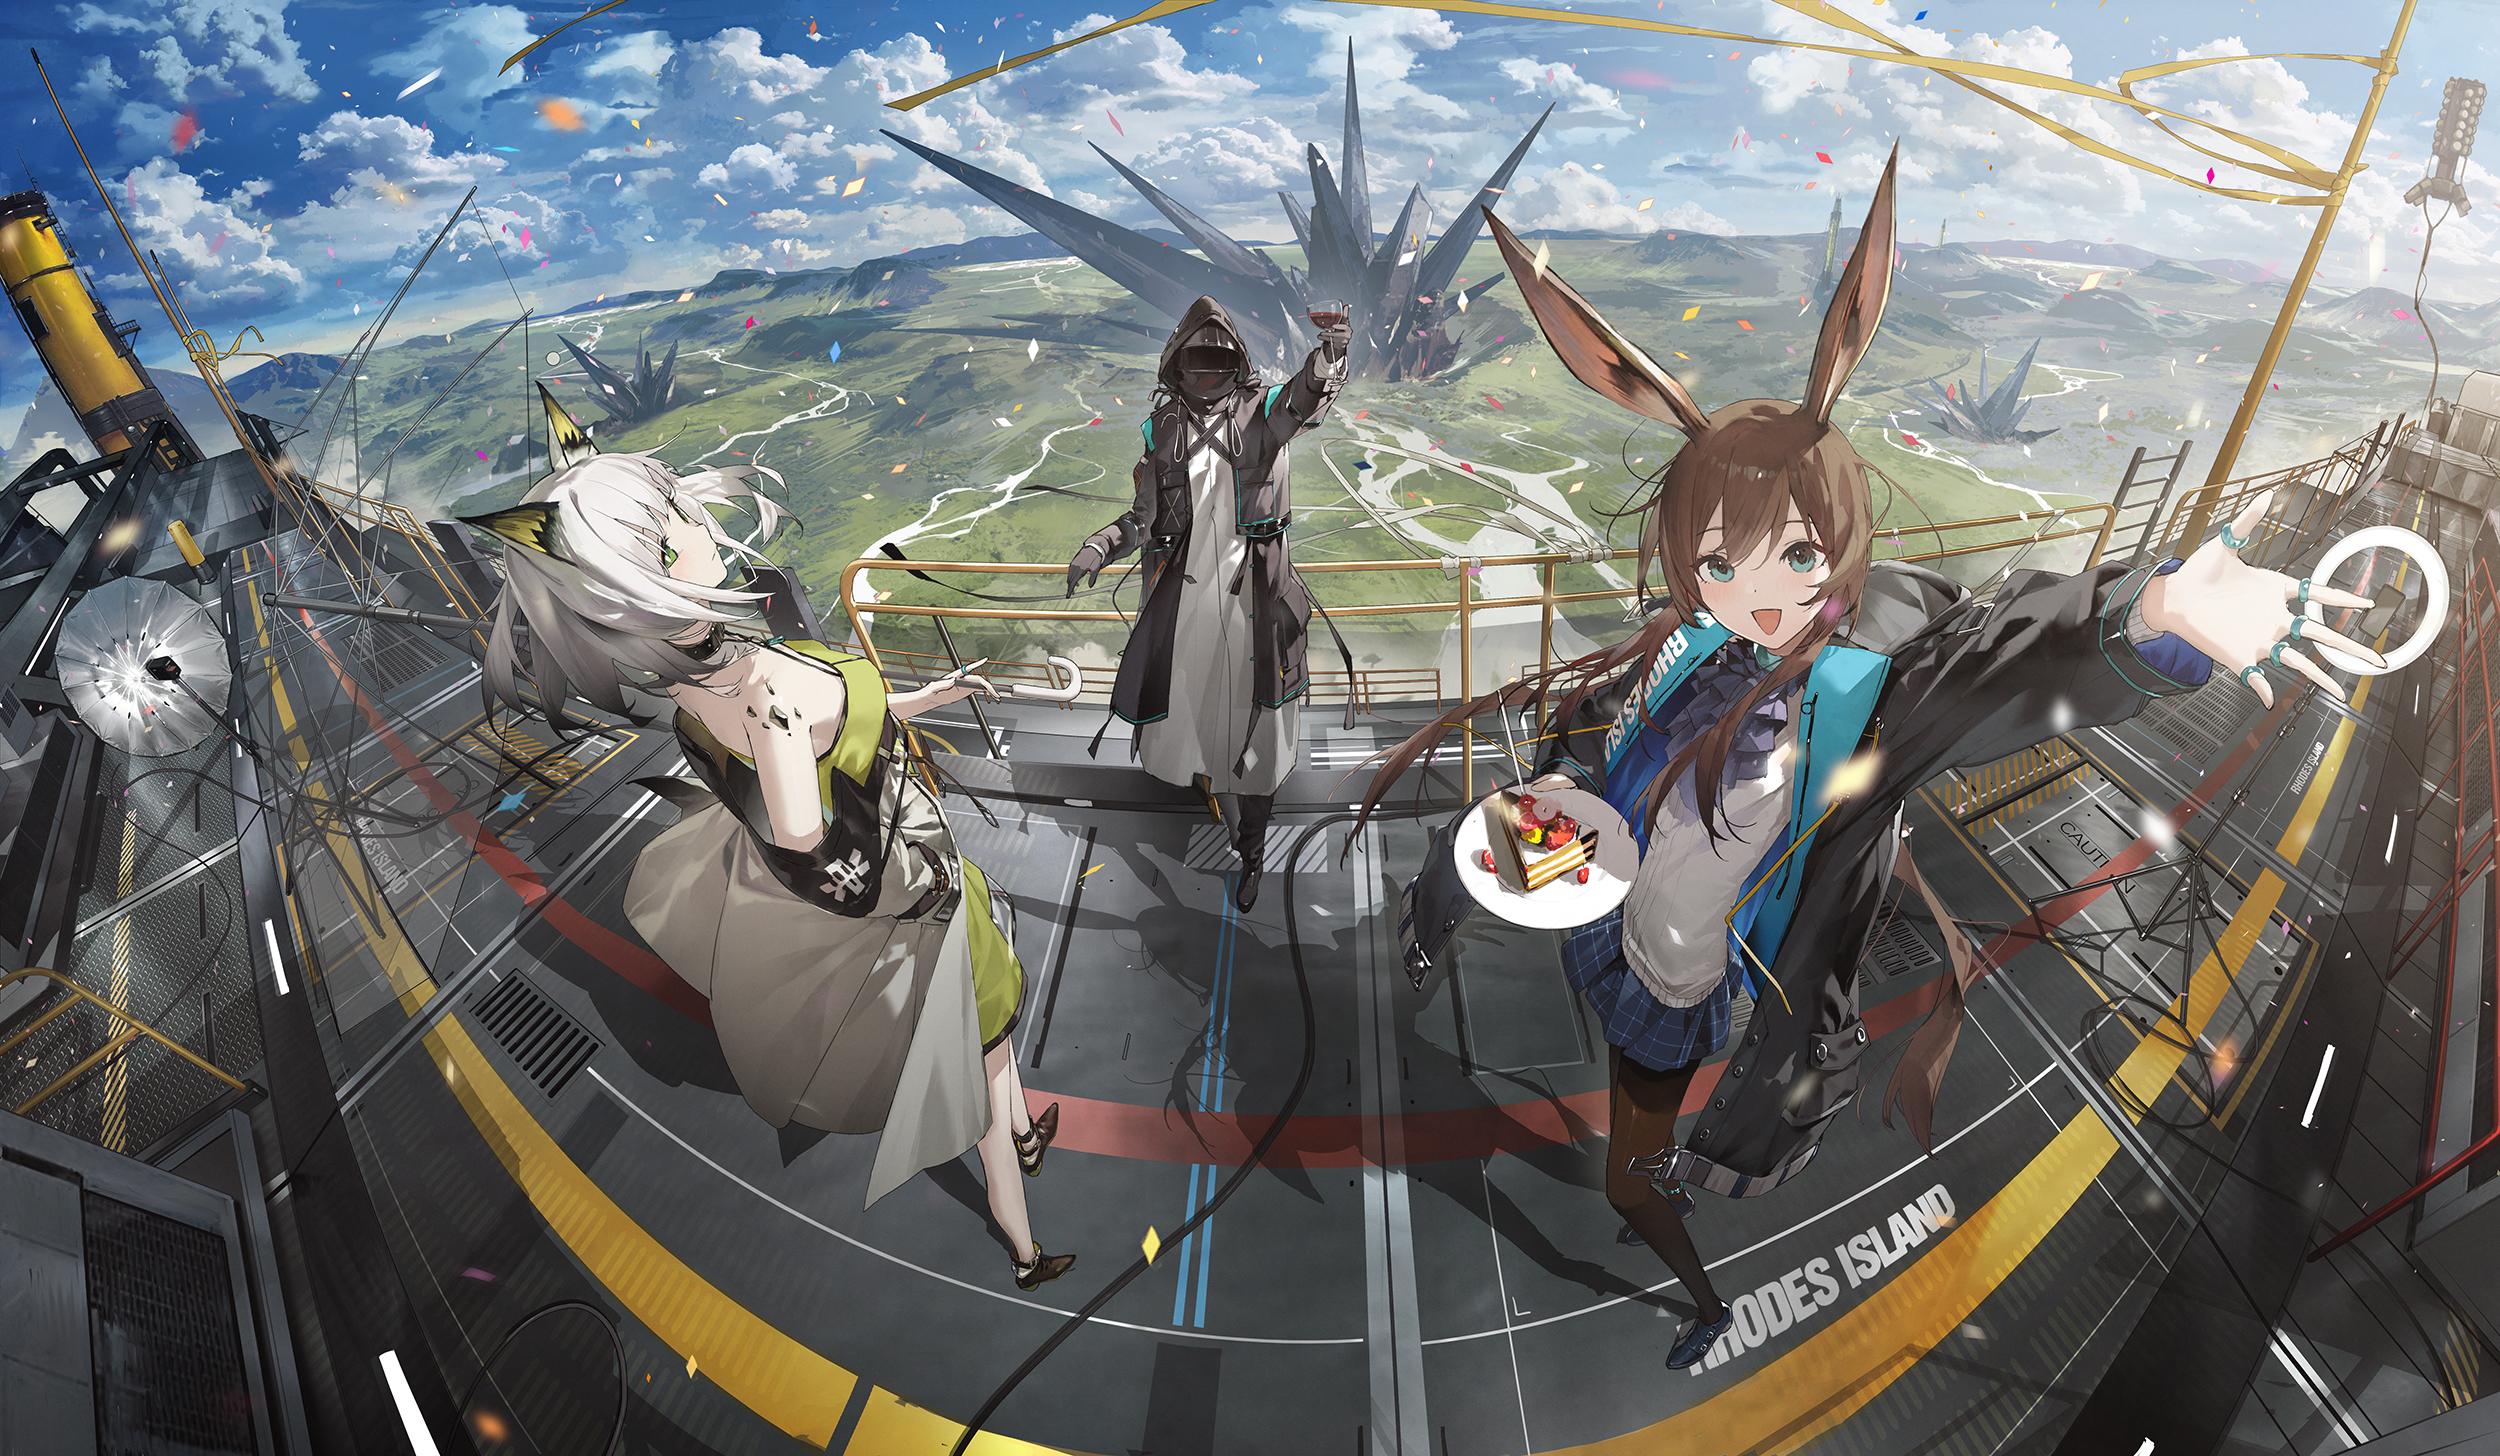 Anime 2500x1456 Arknights animal ears Amiya (Arknights) clouds Doctor(Arknights) confetti Kal'tsit (Arknights) food landscape high angle looking at viewer sky two women umbrella fisheye lens long hair long sleeves standing iron railing bunny ears cat ears group of people Kieed cake arms up outdoors cup drink